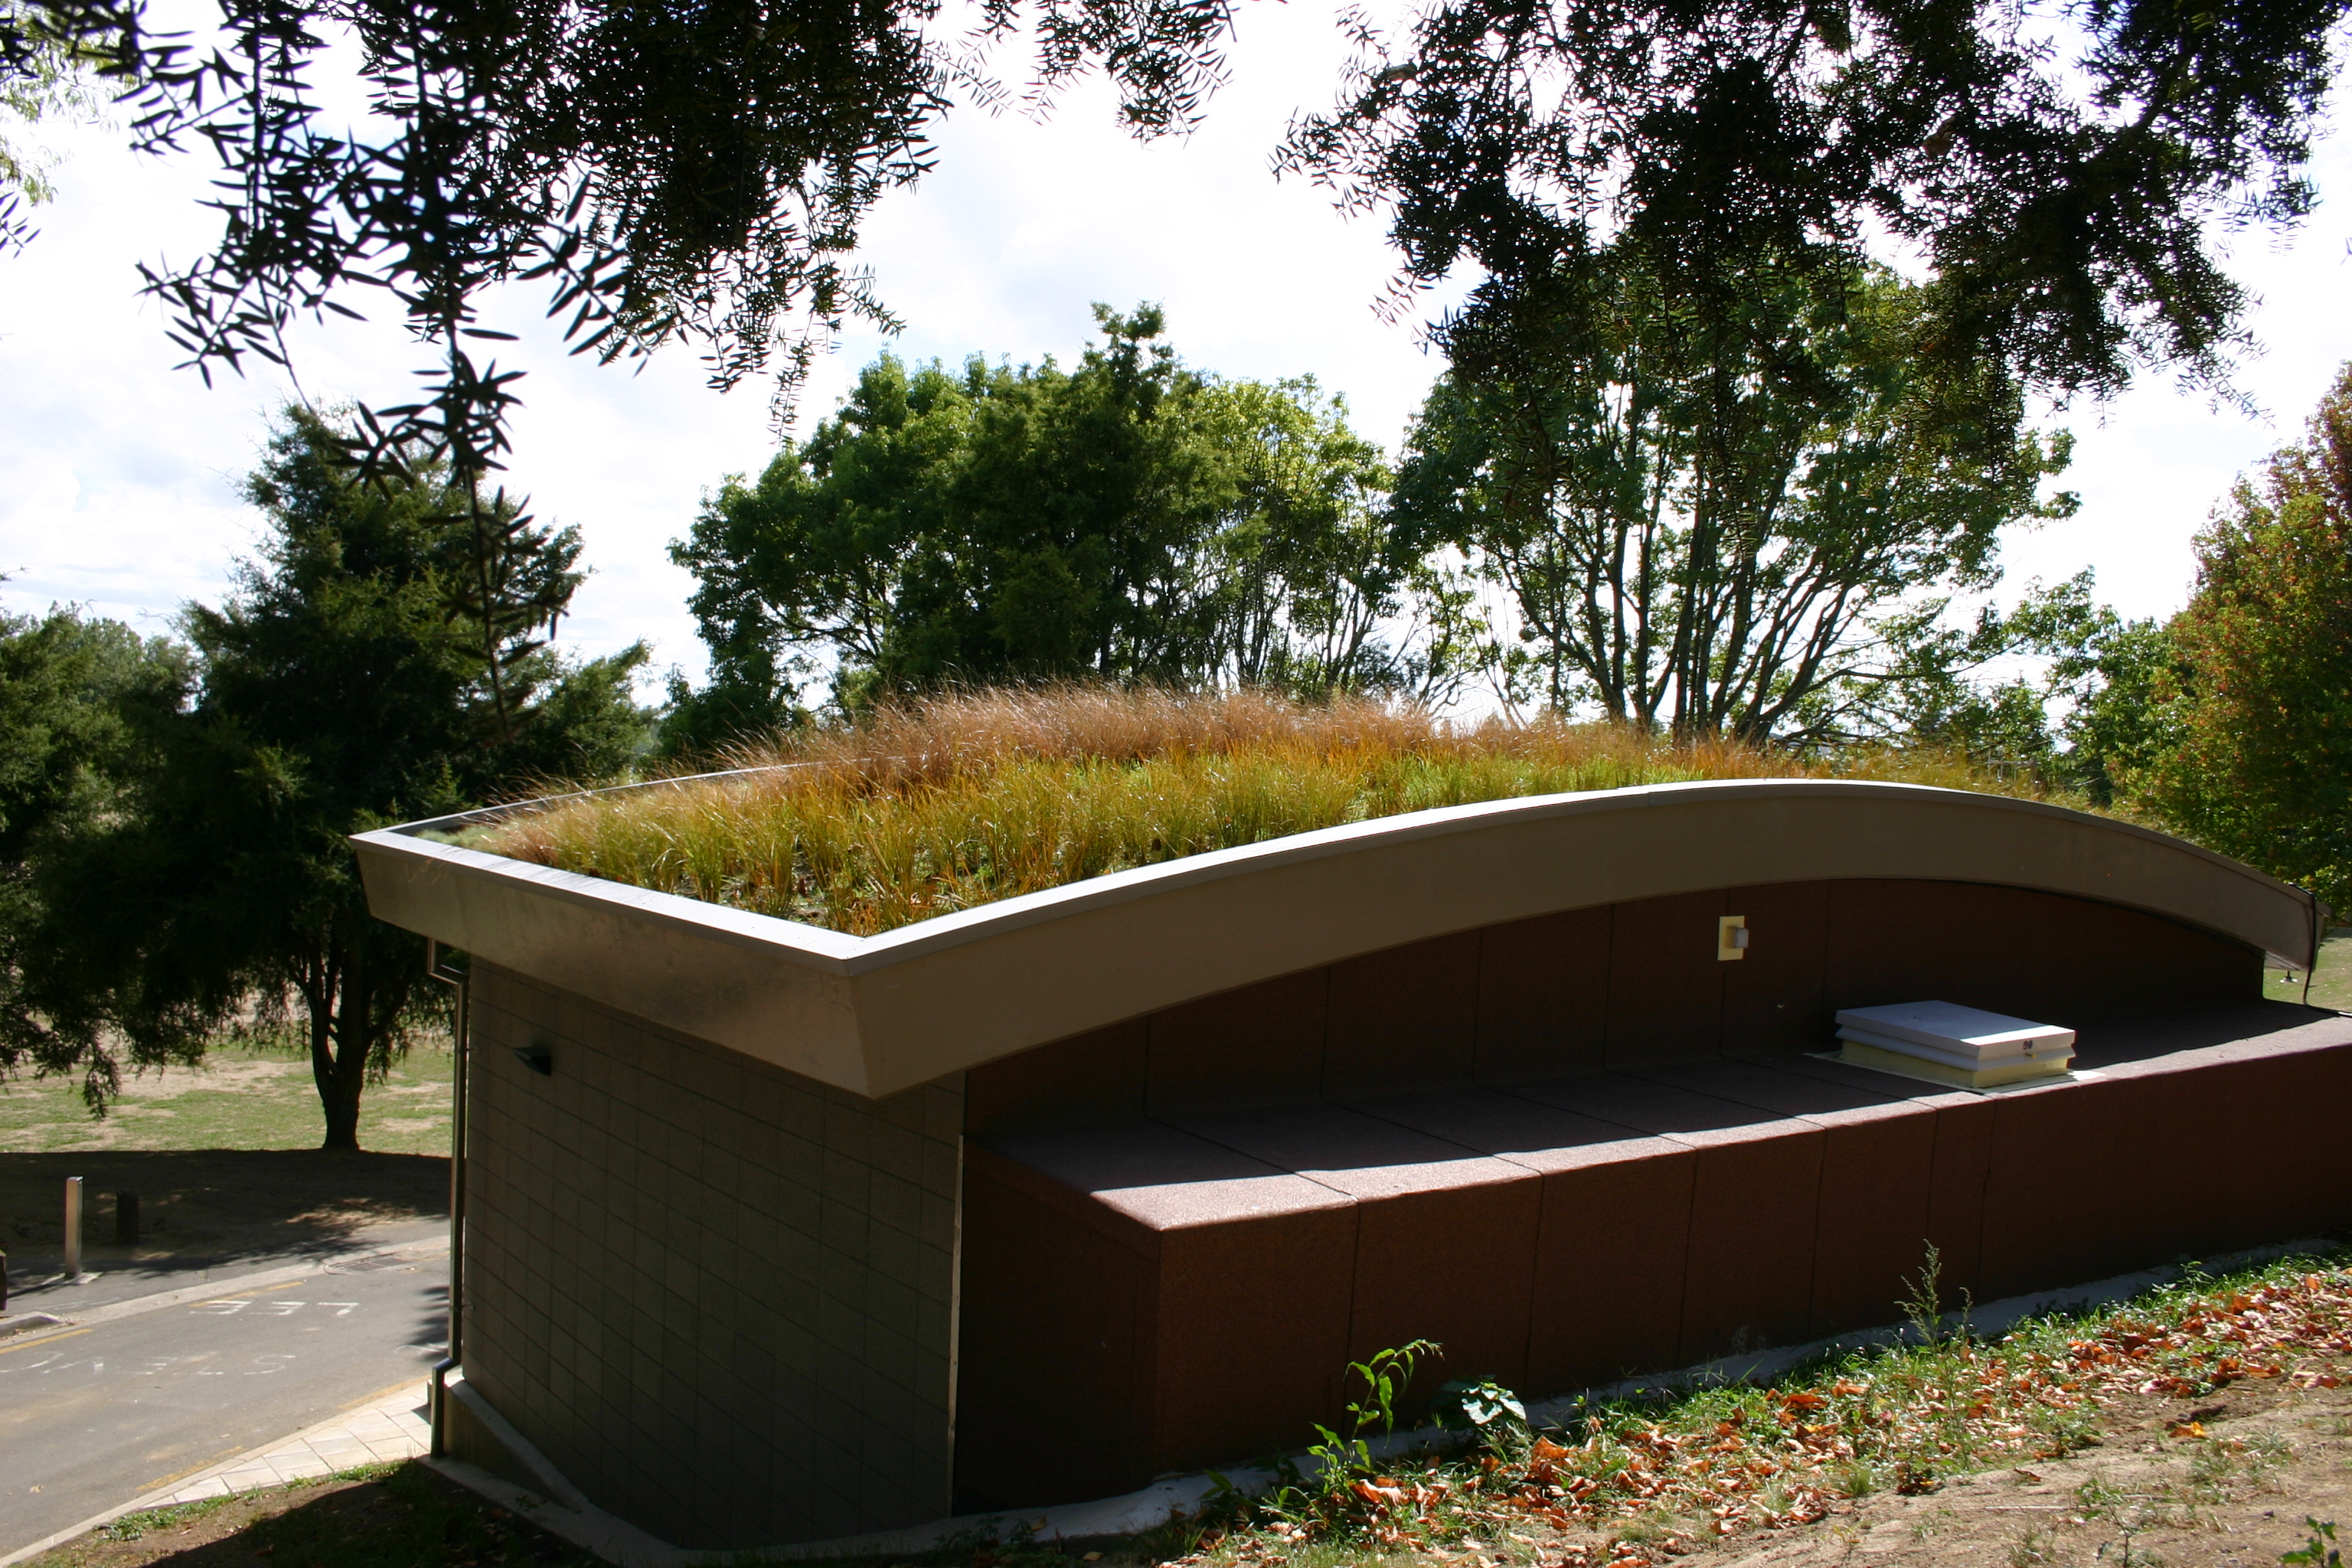 Green roof on public toilets